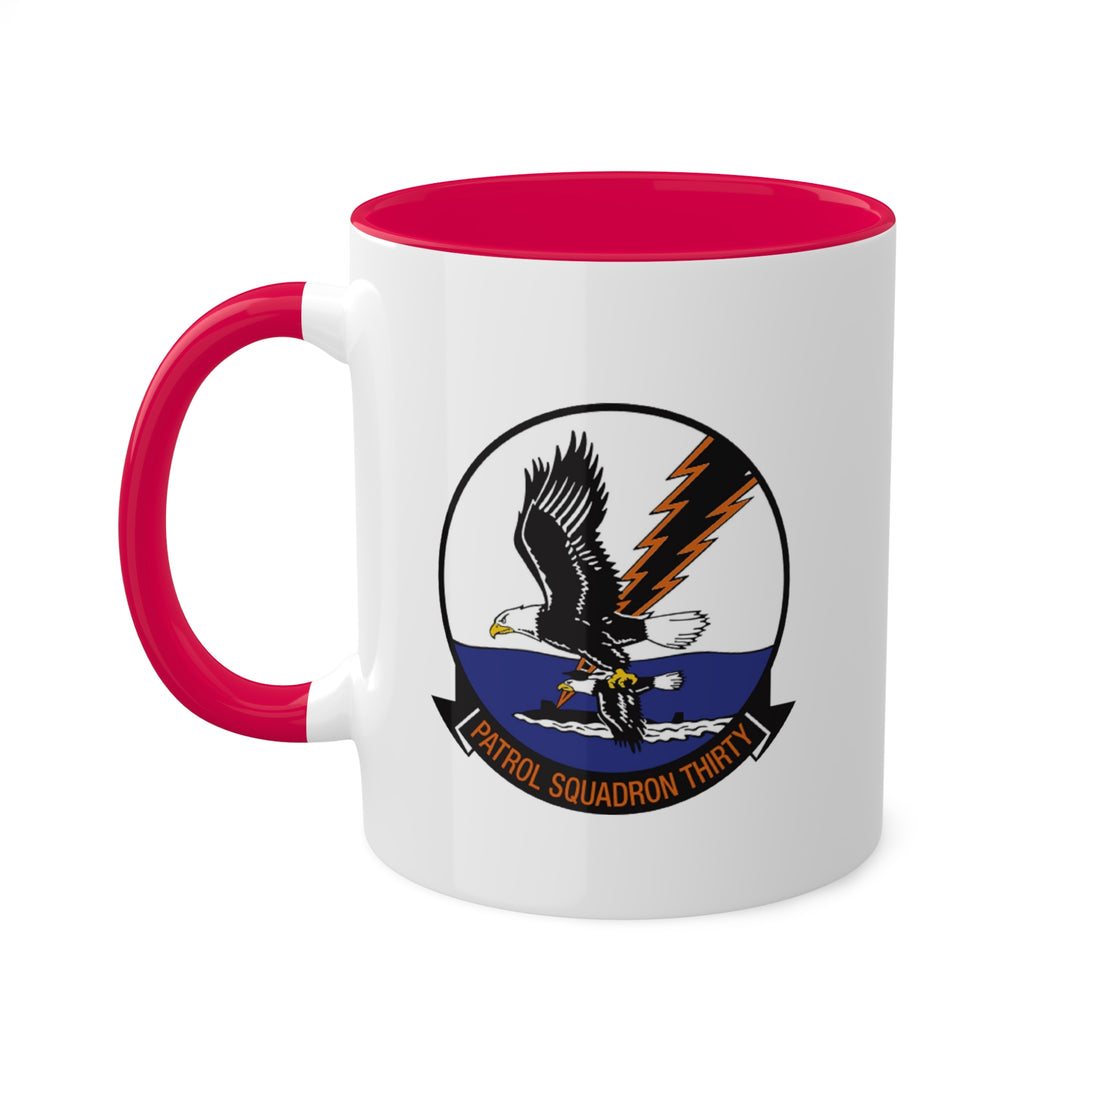 VP-30 "Pro's Nest" Naval Aircrewman Wings 10oz. Coffe Mug, Navy Maritime Patrol Replacement Squadron flying the P-3 Orion and P-8 Poseidon